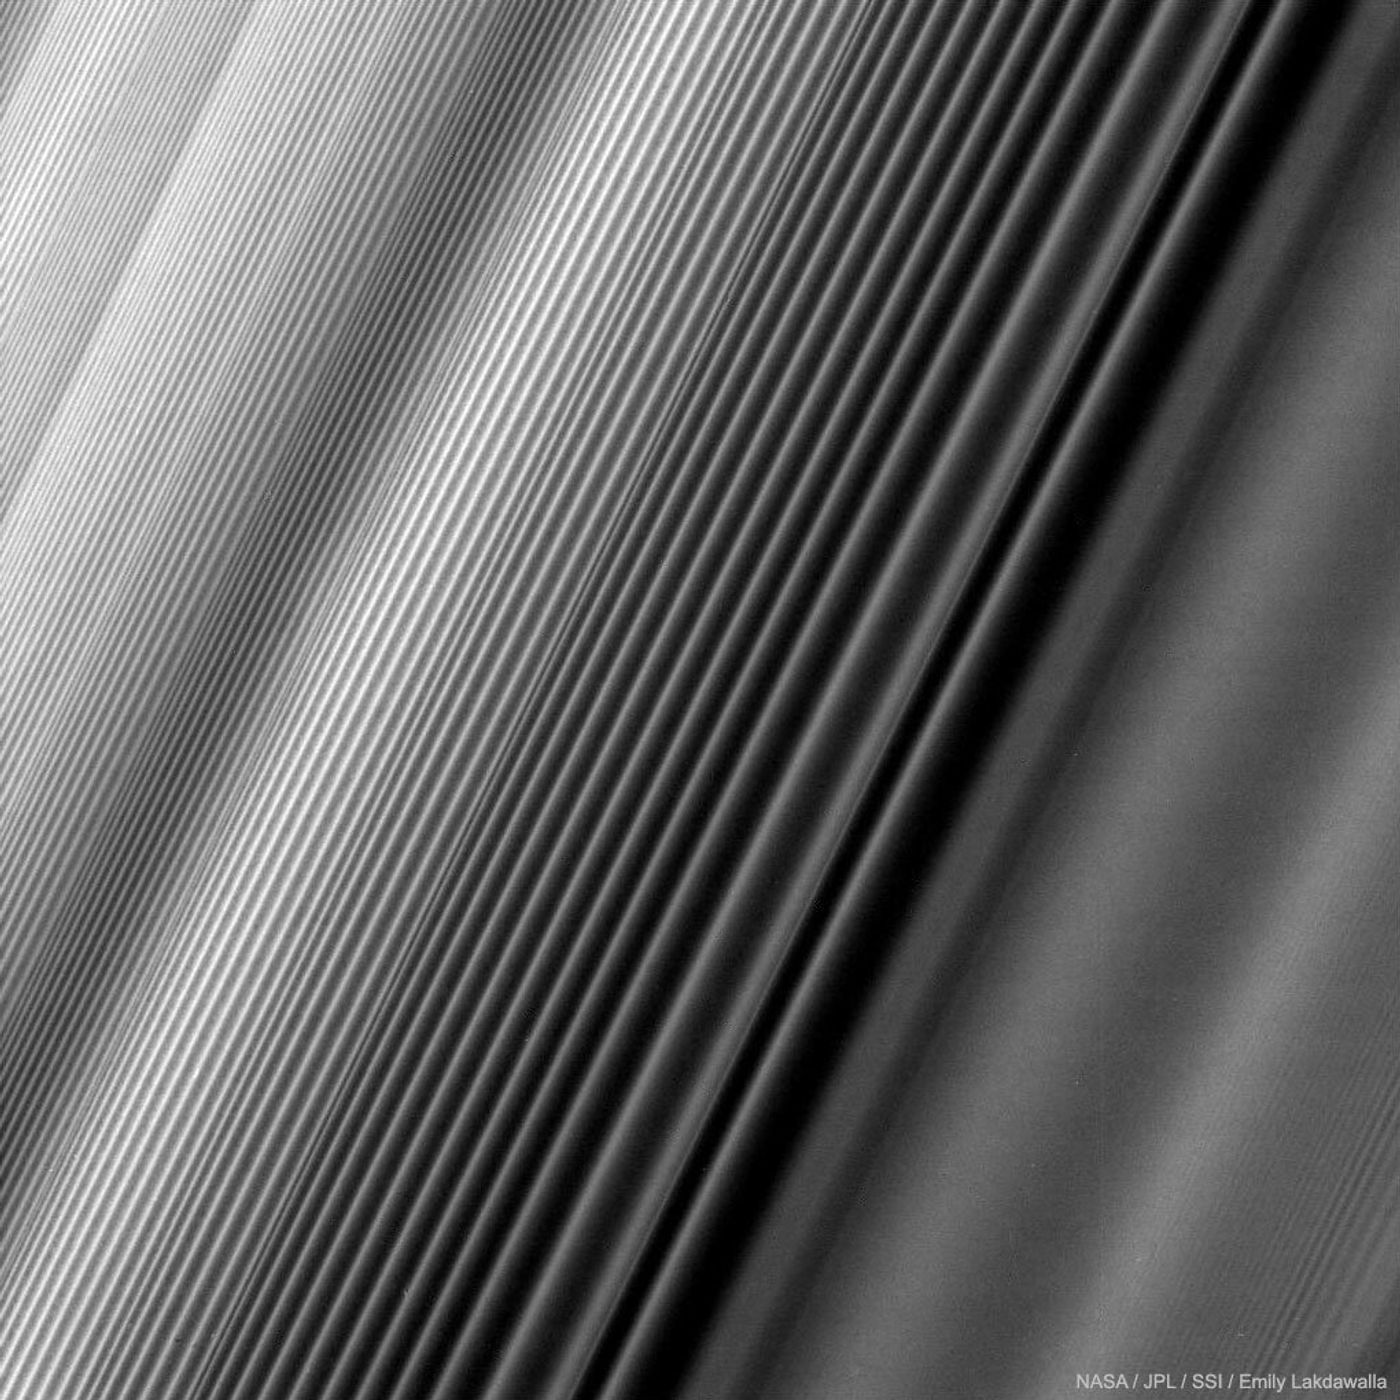 A close-up of Saturn's rings, captured with the Cassini spacecraft before its plunge in 2017.